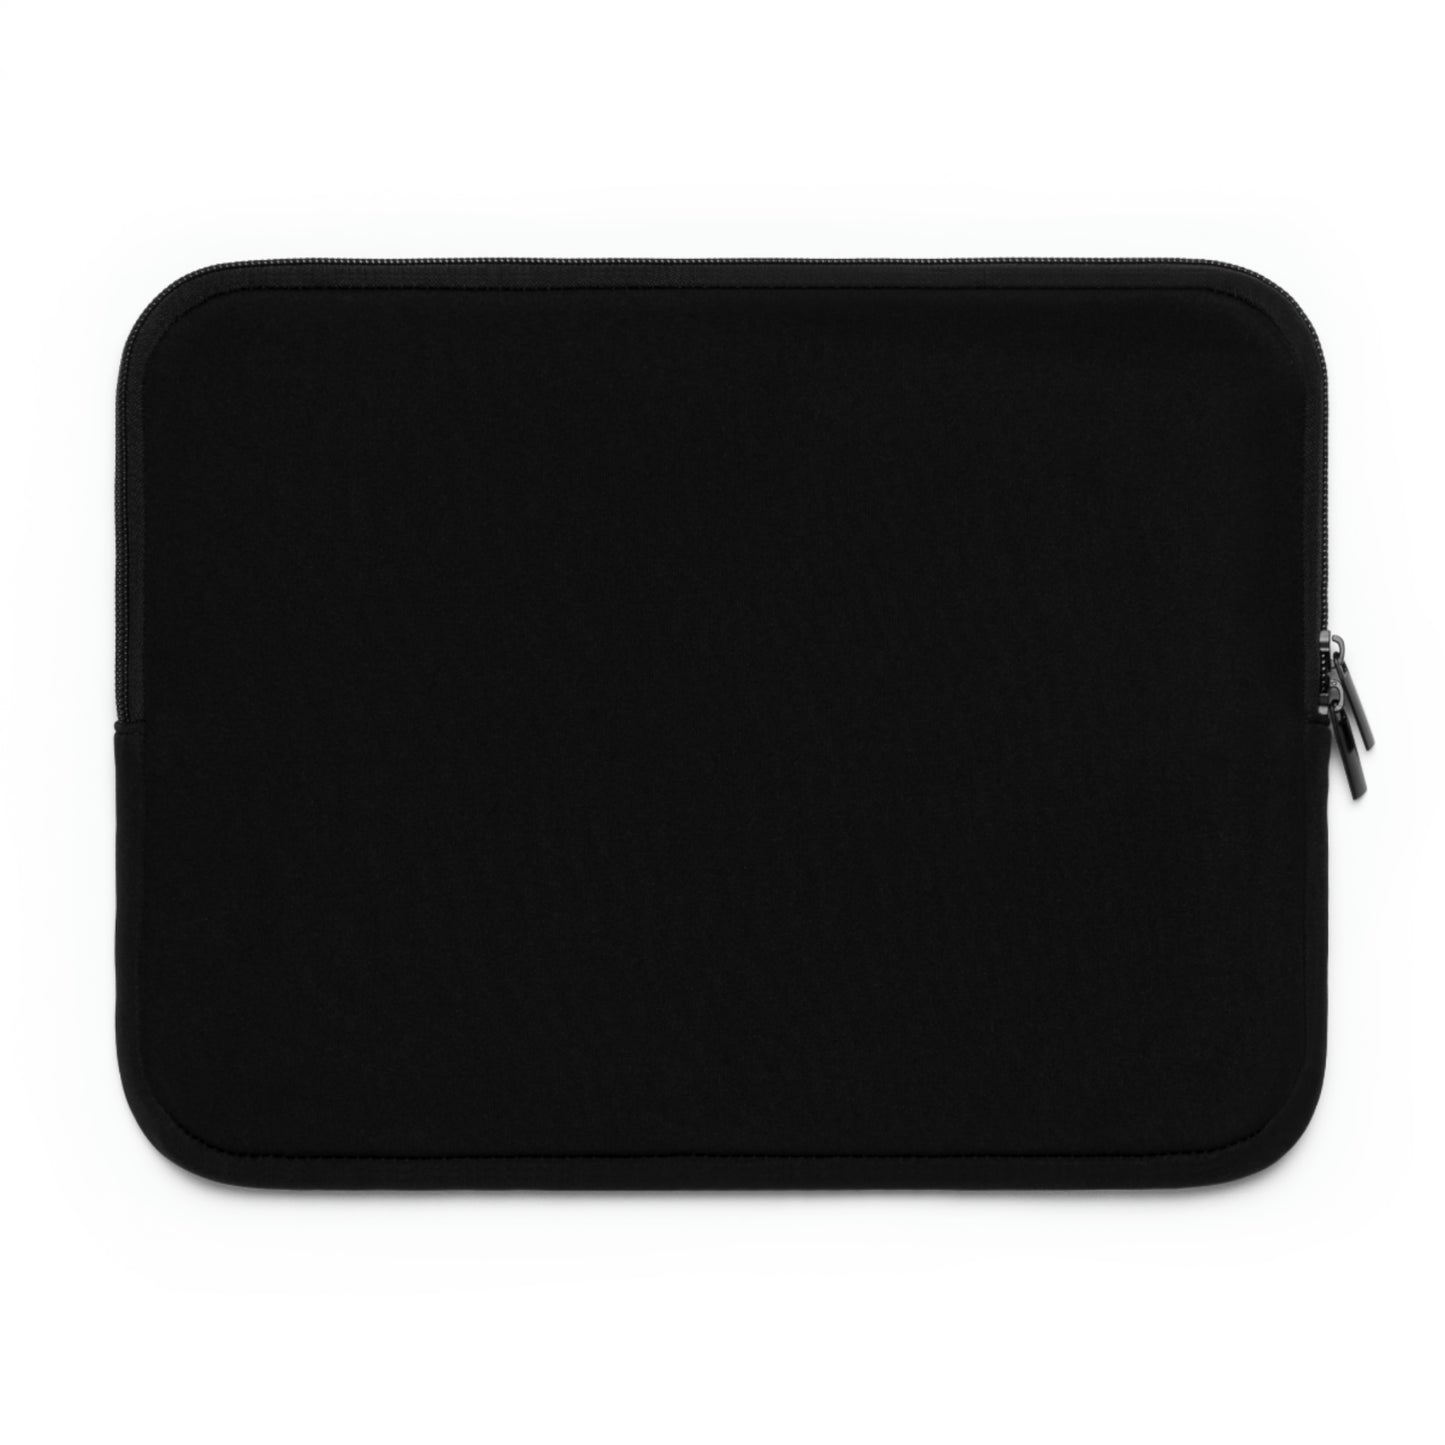 Tony South: "Credo quia absurdum (I believe because it is absurd)" - Laptop Sleeve